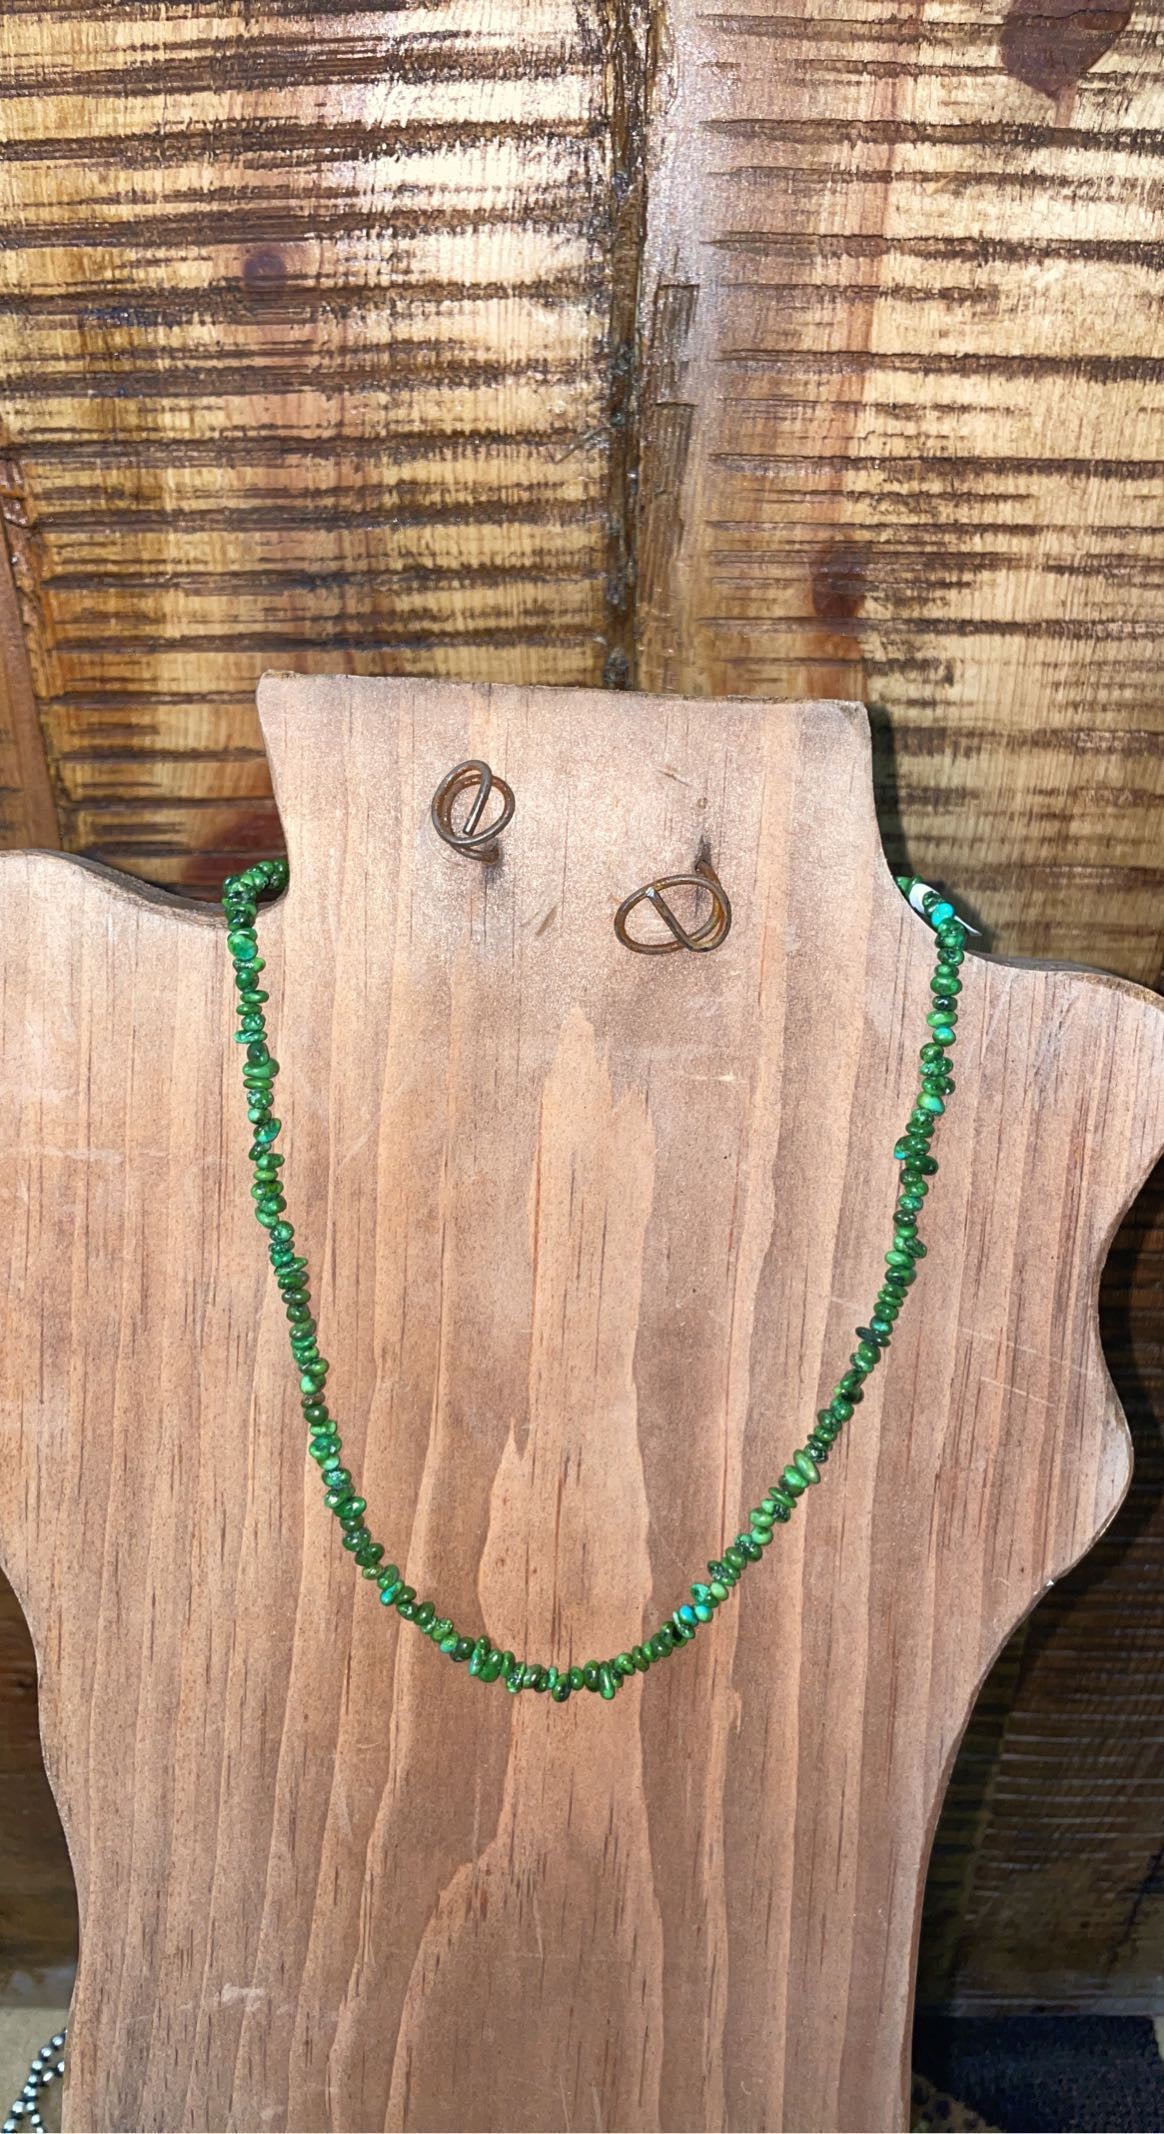 Green Giant necklace